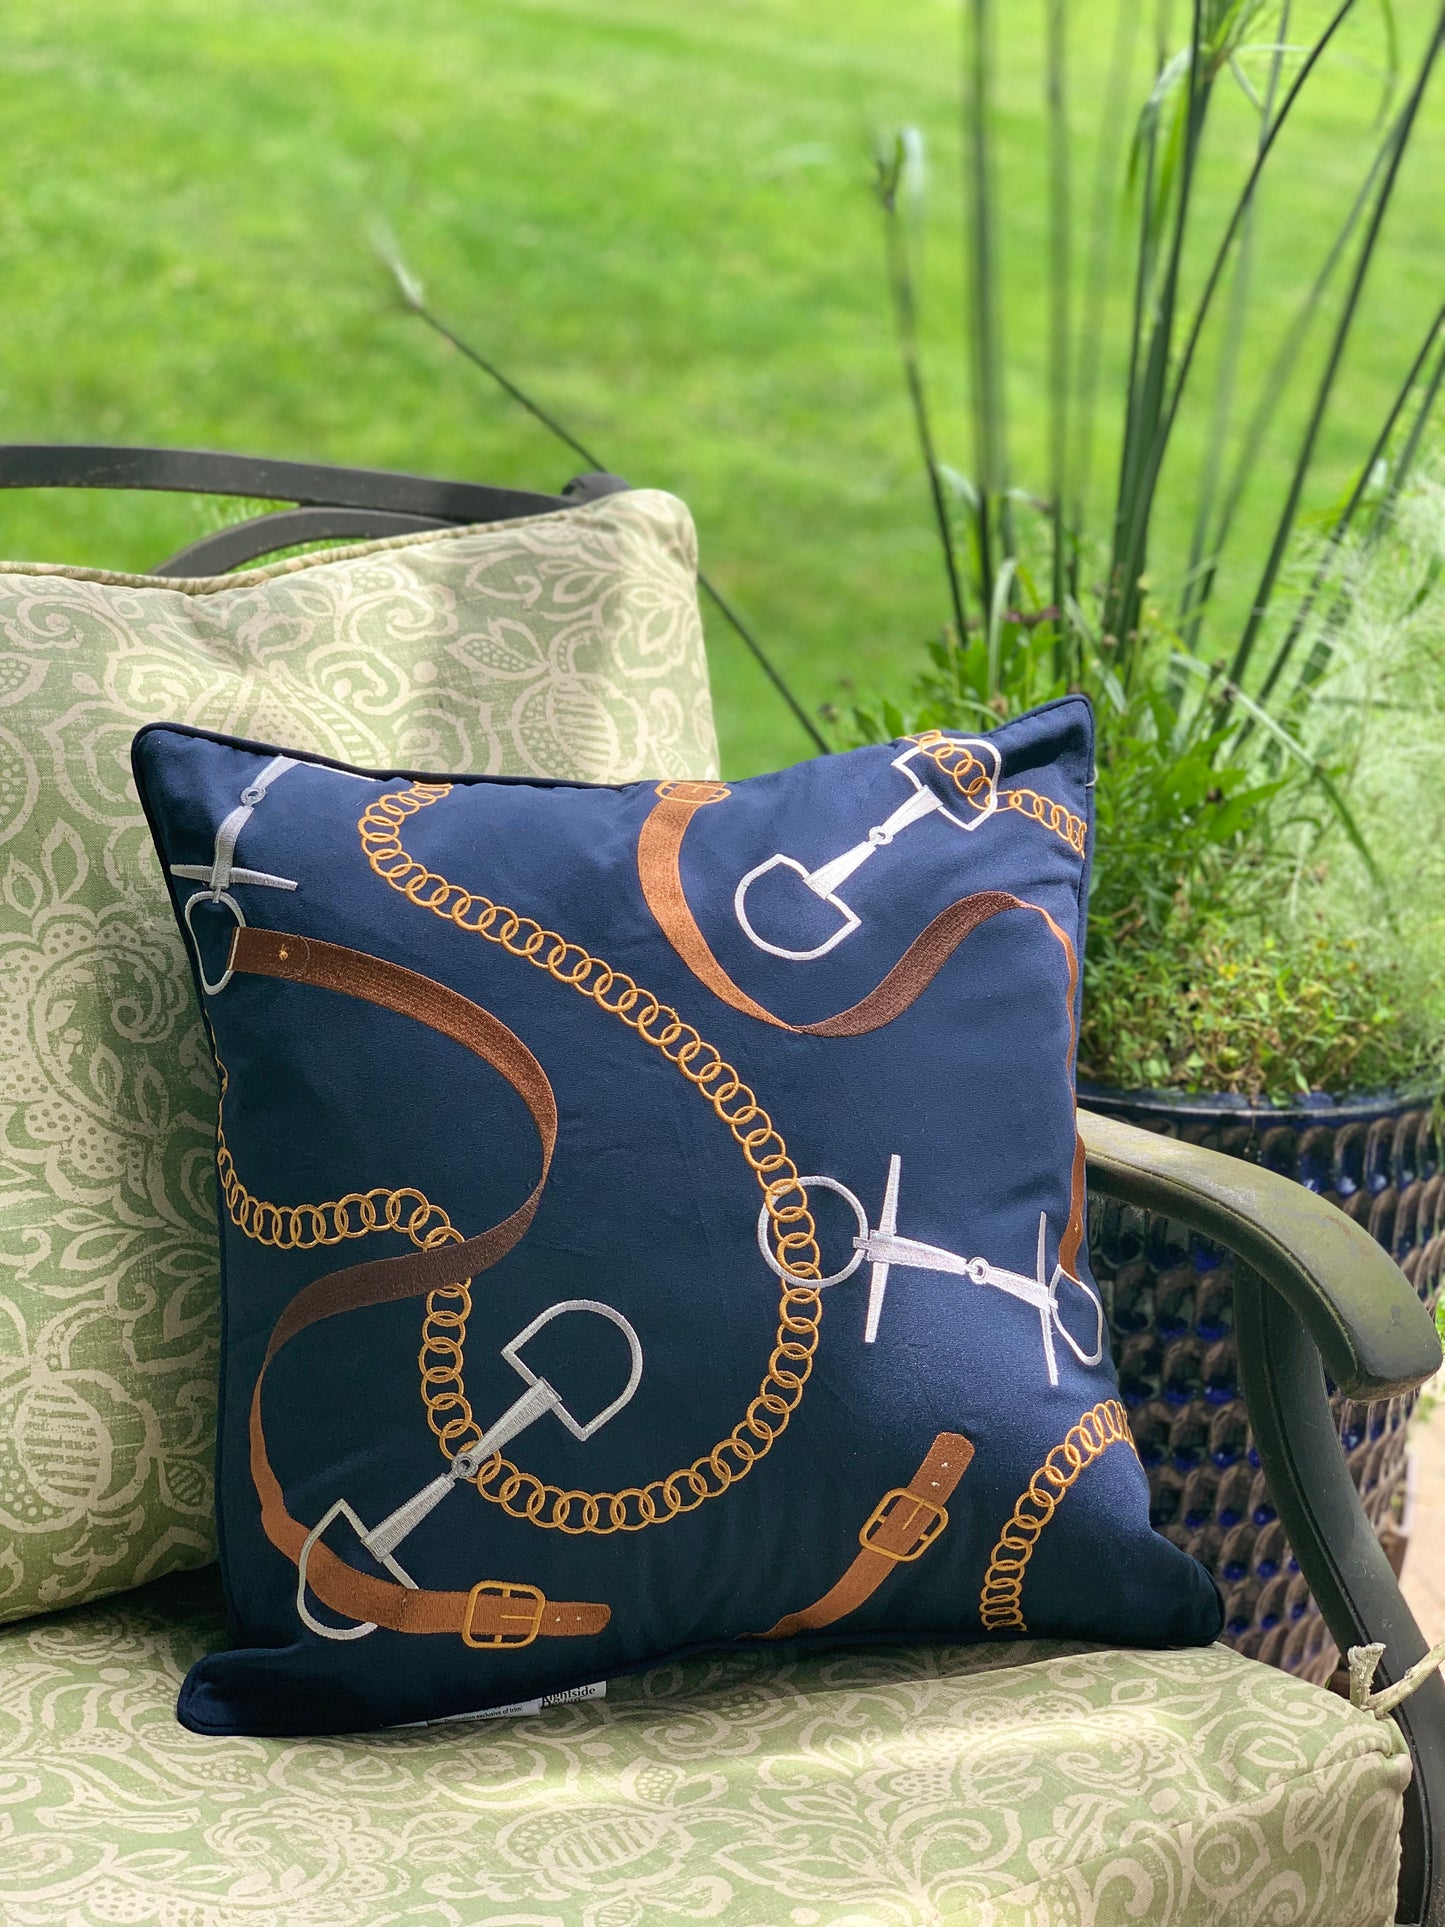 Bits and Leather Navy pillow styled on an outdoor couch.